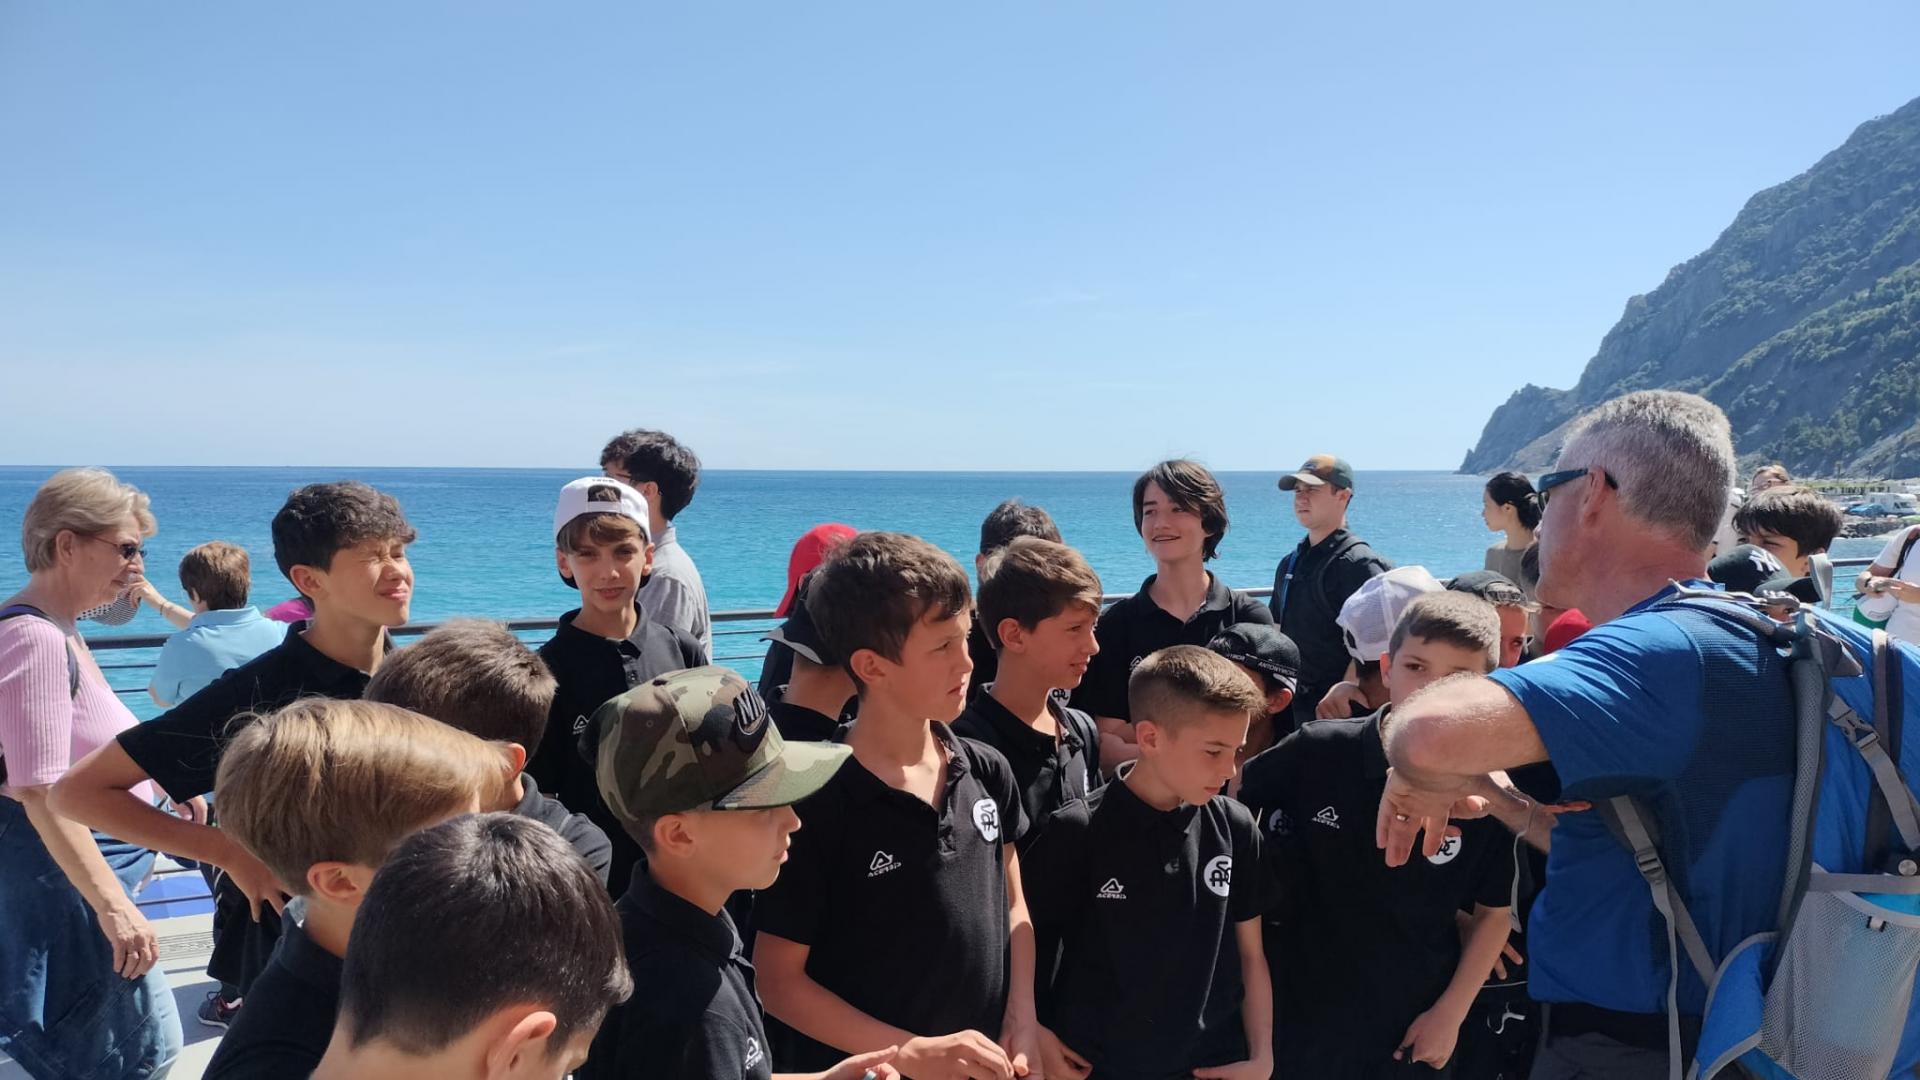 The Aquilotto Youth Sector exploring the beauty of the Cinque Terre Park